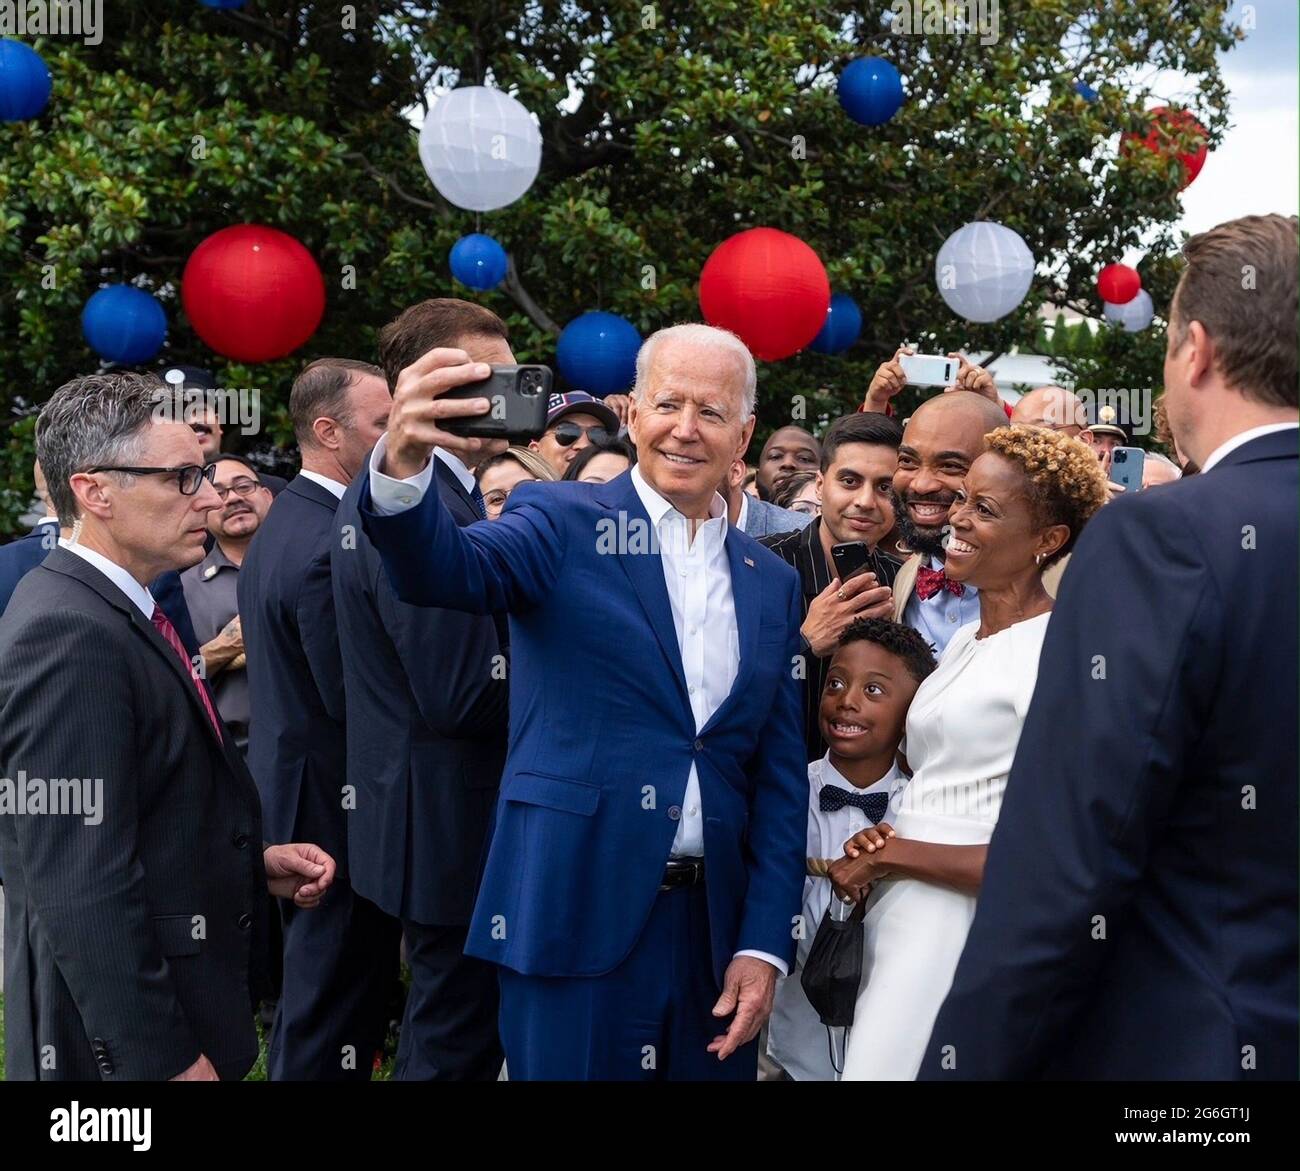 U.S President Joe Biden takes a selfie with guests during Independence Day celebrations on the South Lawn at the White House July 4, 2021 in Washington, D.C. Stock Photo